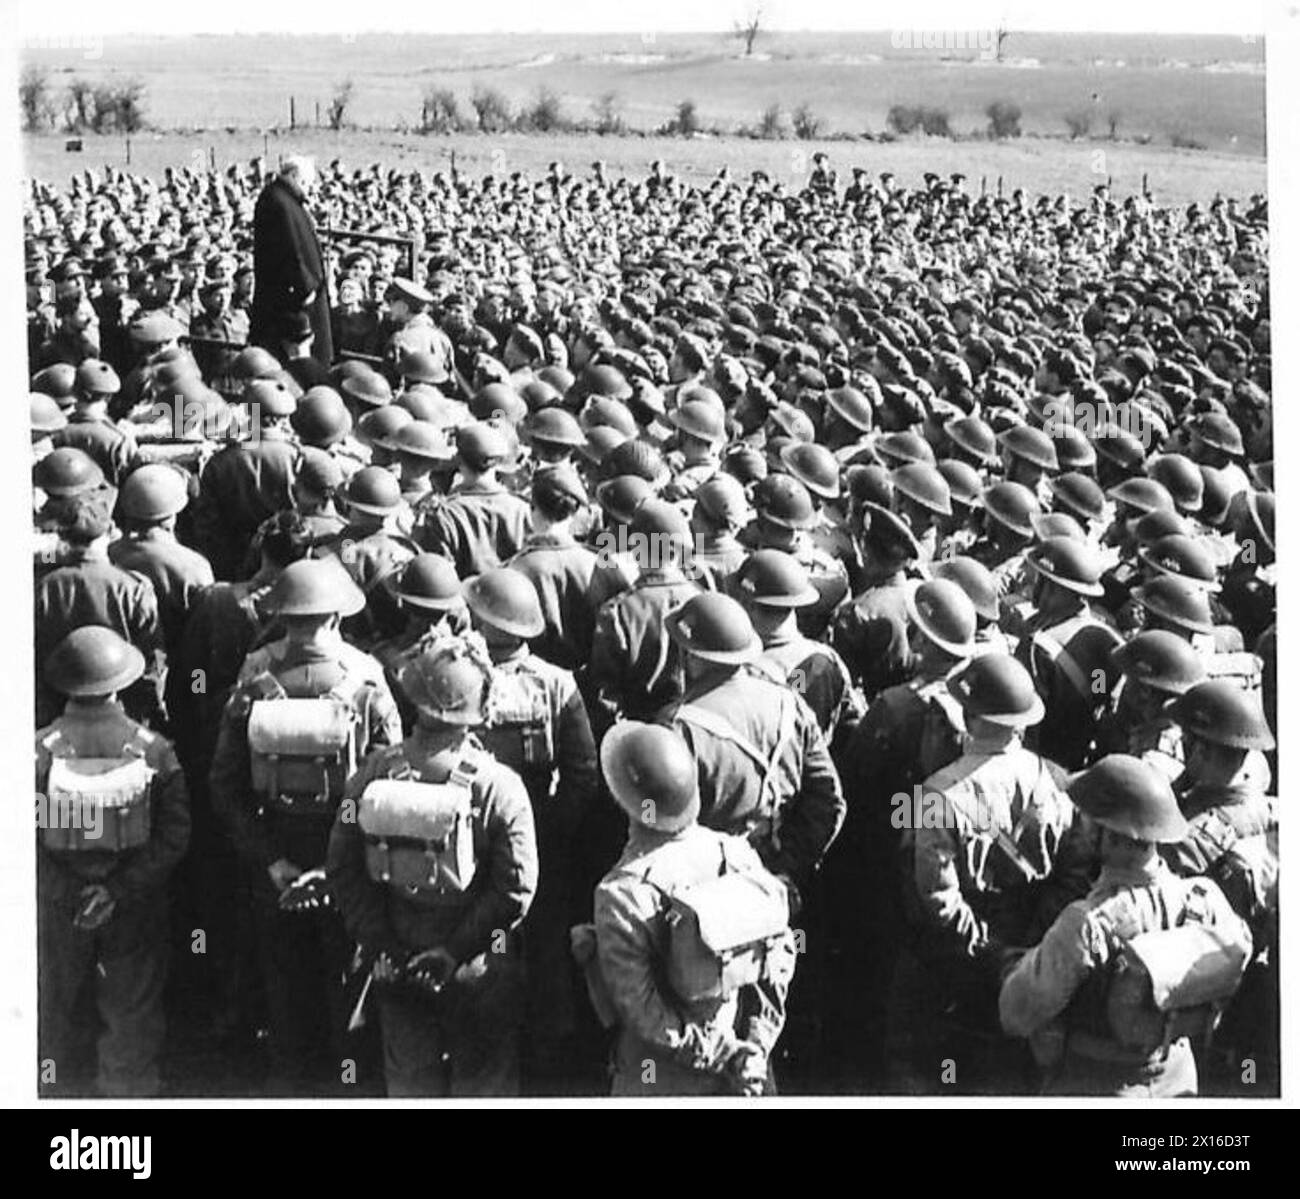 THE PRIME MINISTER IN YORKSHIRE - The Prime Minister speaking to troops on the Yorkshire Wolds British Army Stock Photo